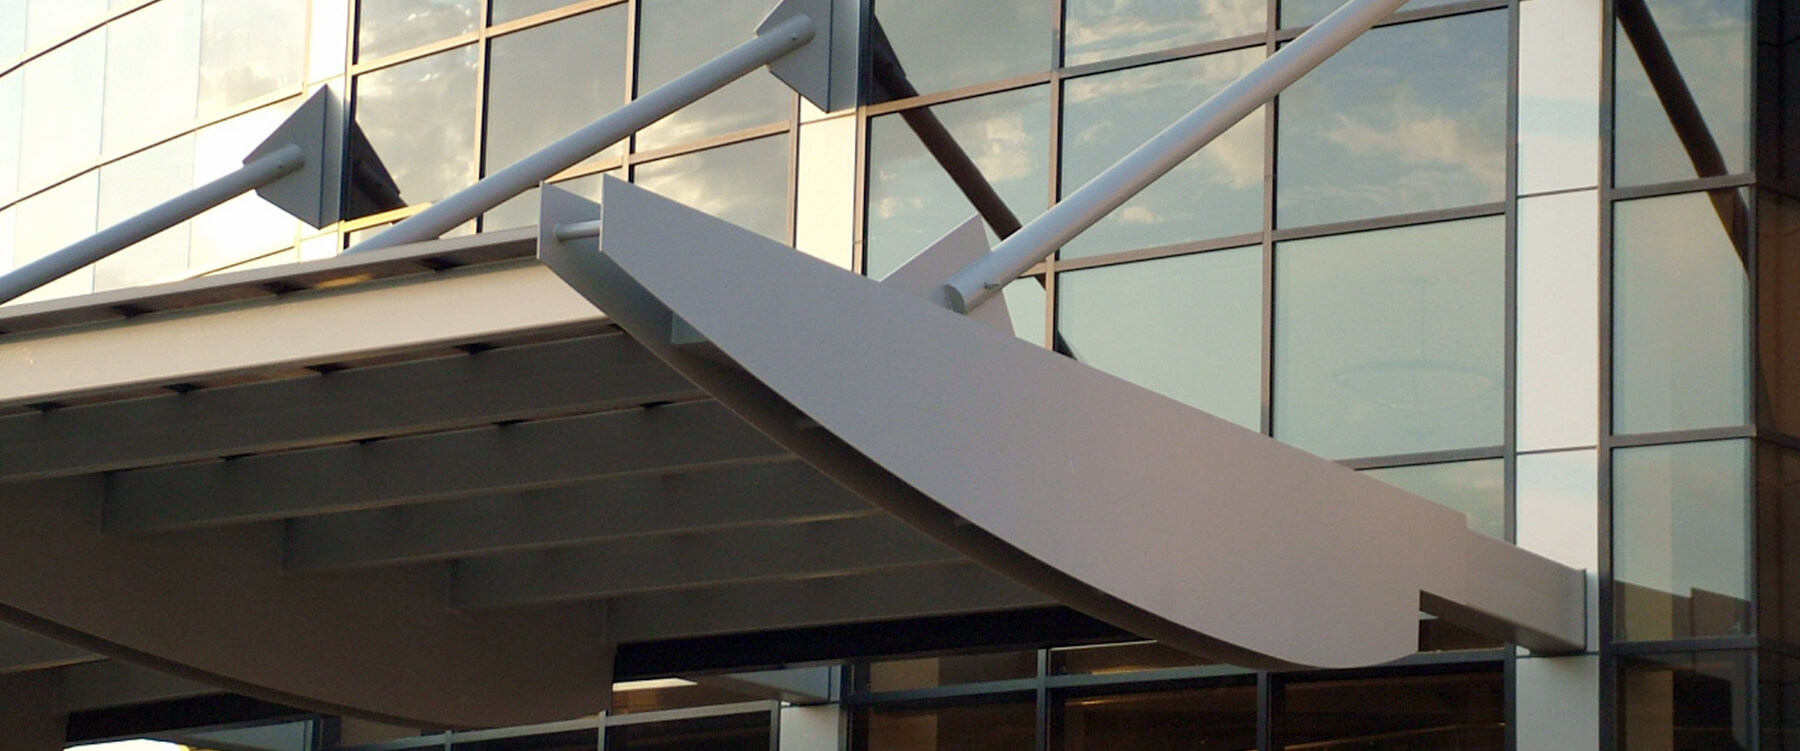 Medical Office Building and Ambulatory Surgical Center Canopy Detail